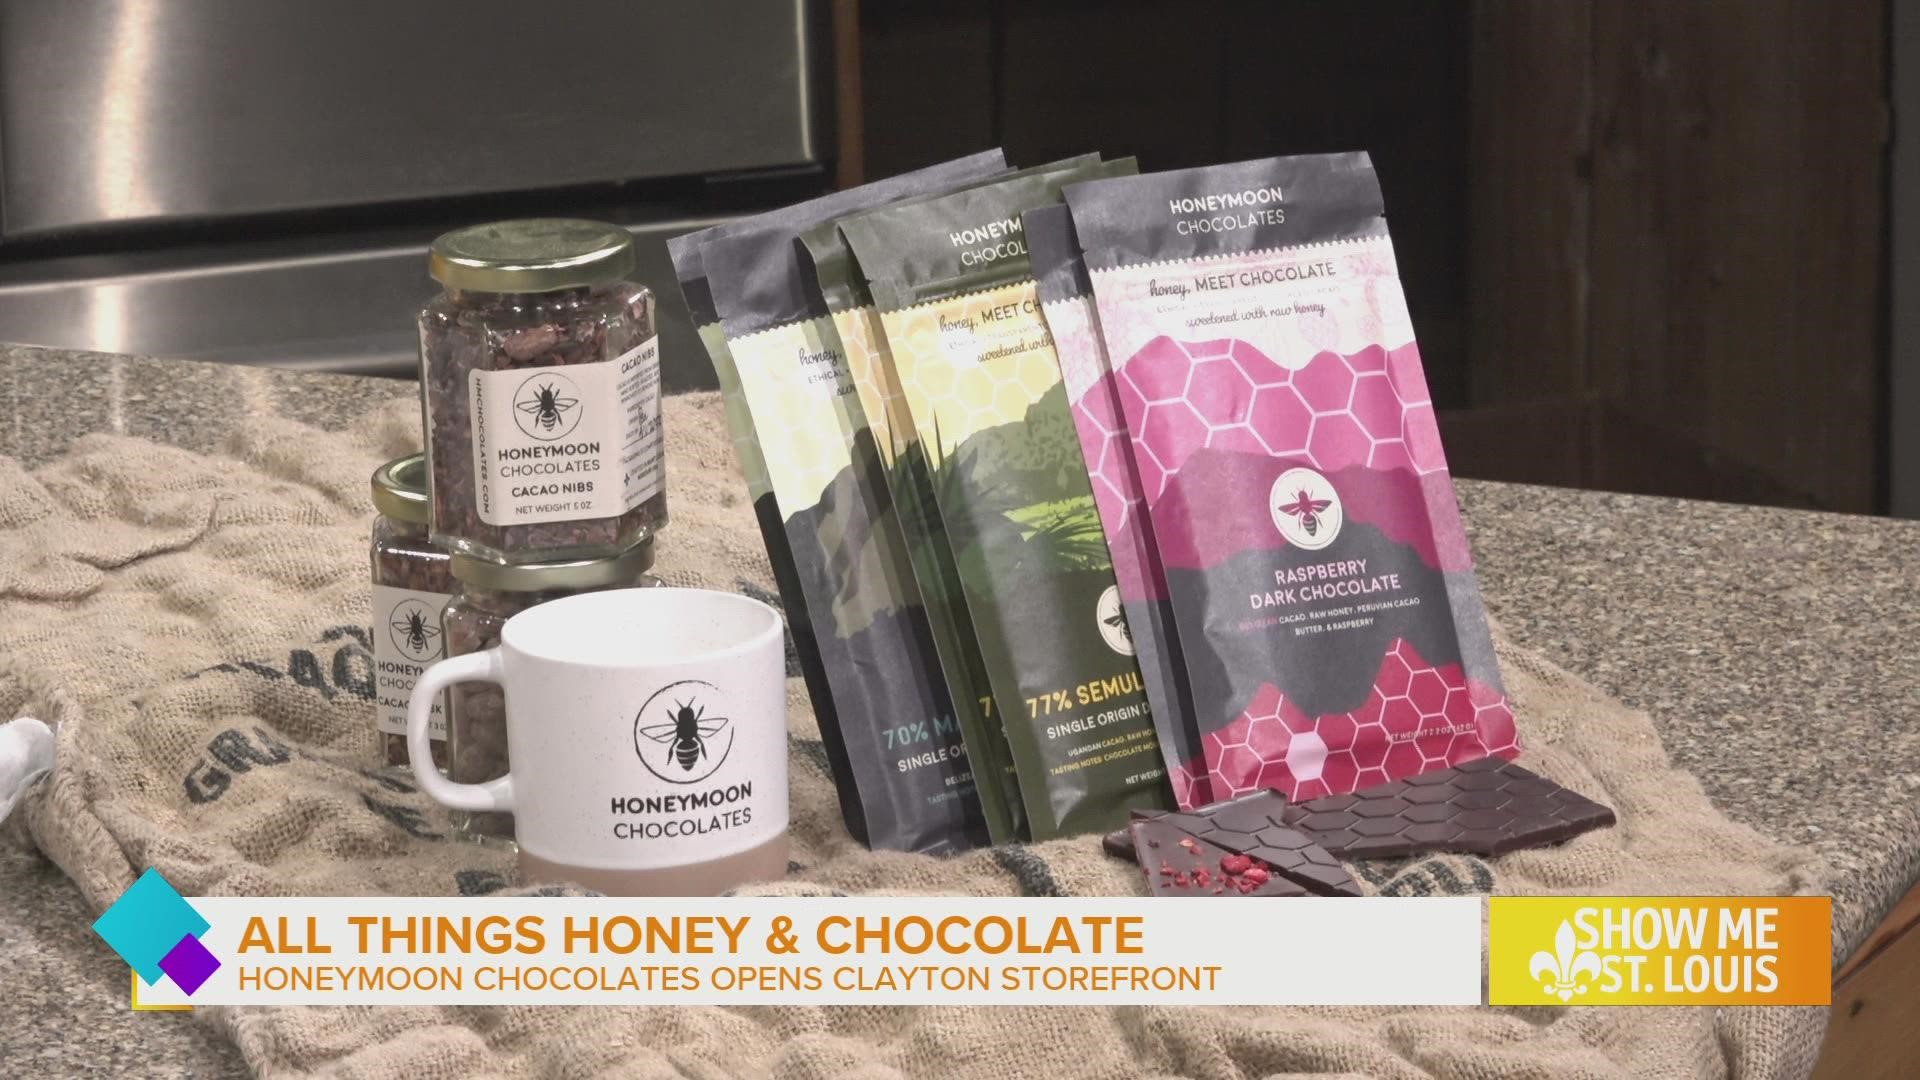 Honeymoon Chocolates crafts ethical chocolate that is sweetened with raw honey.